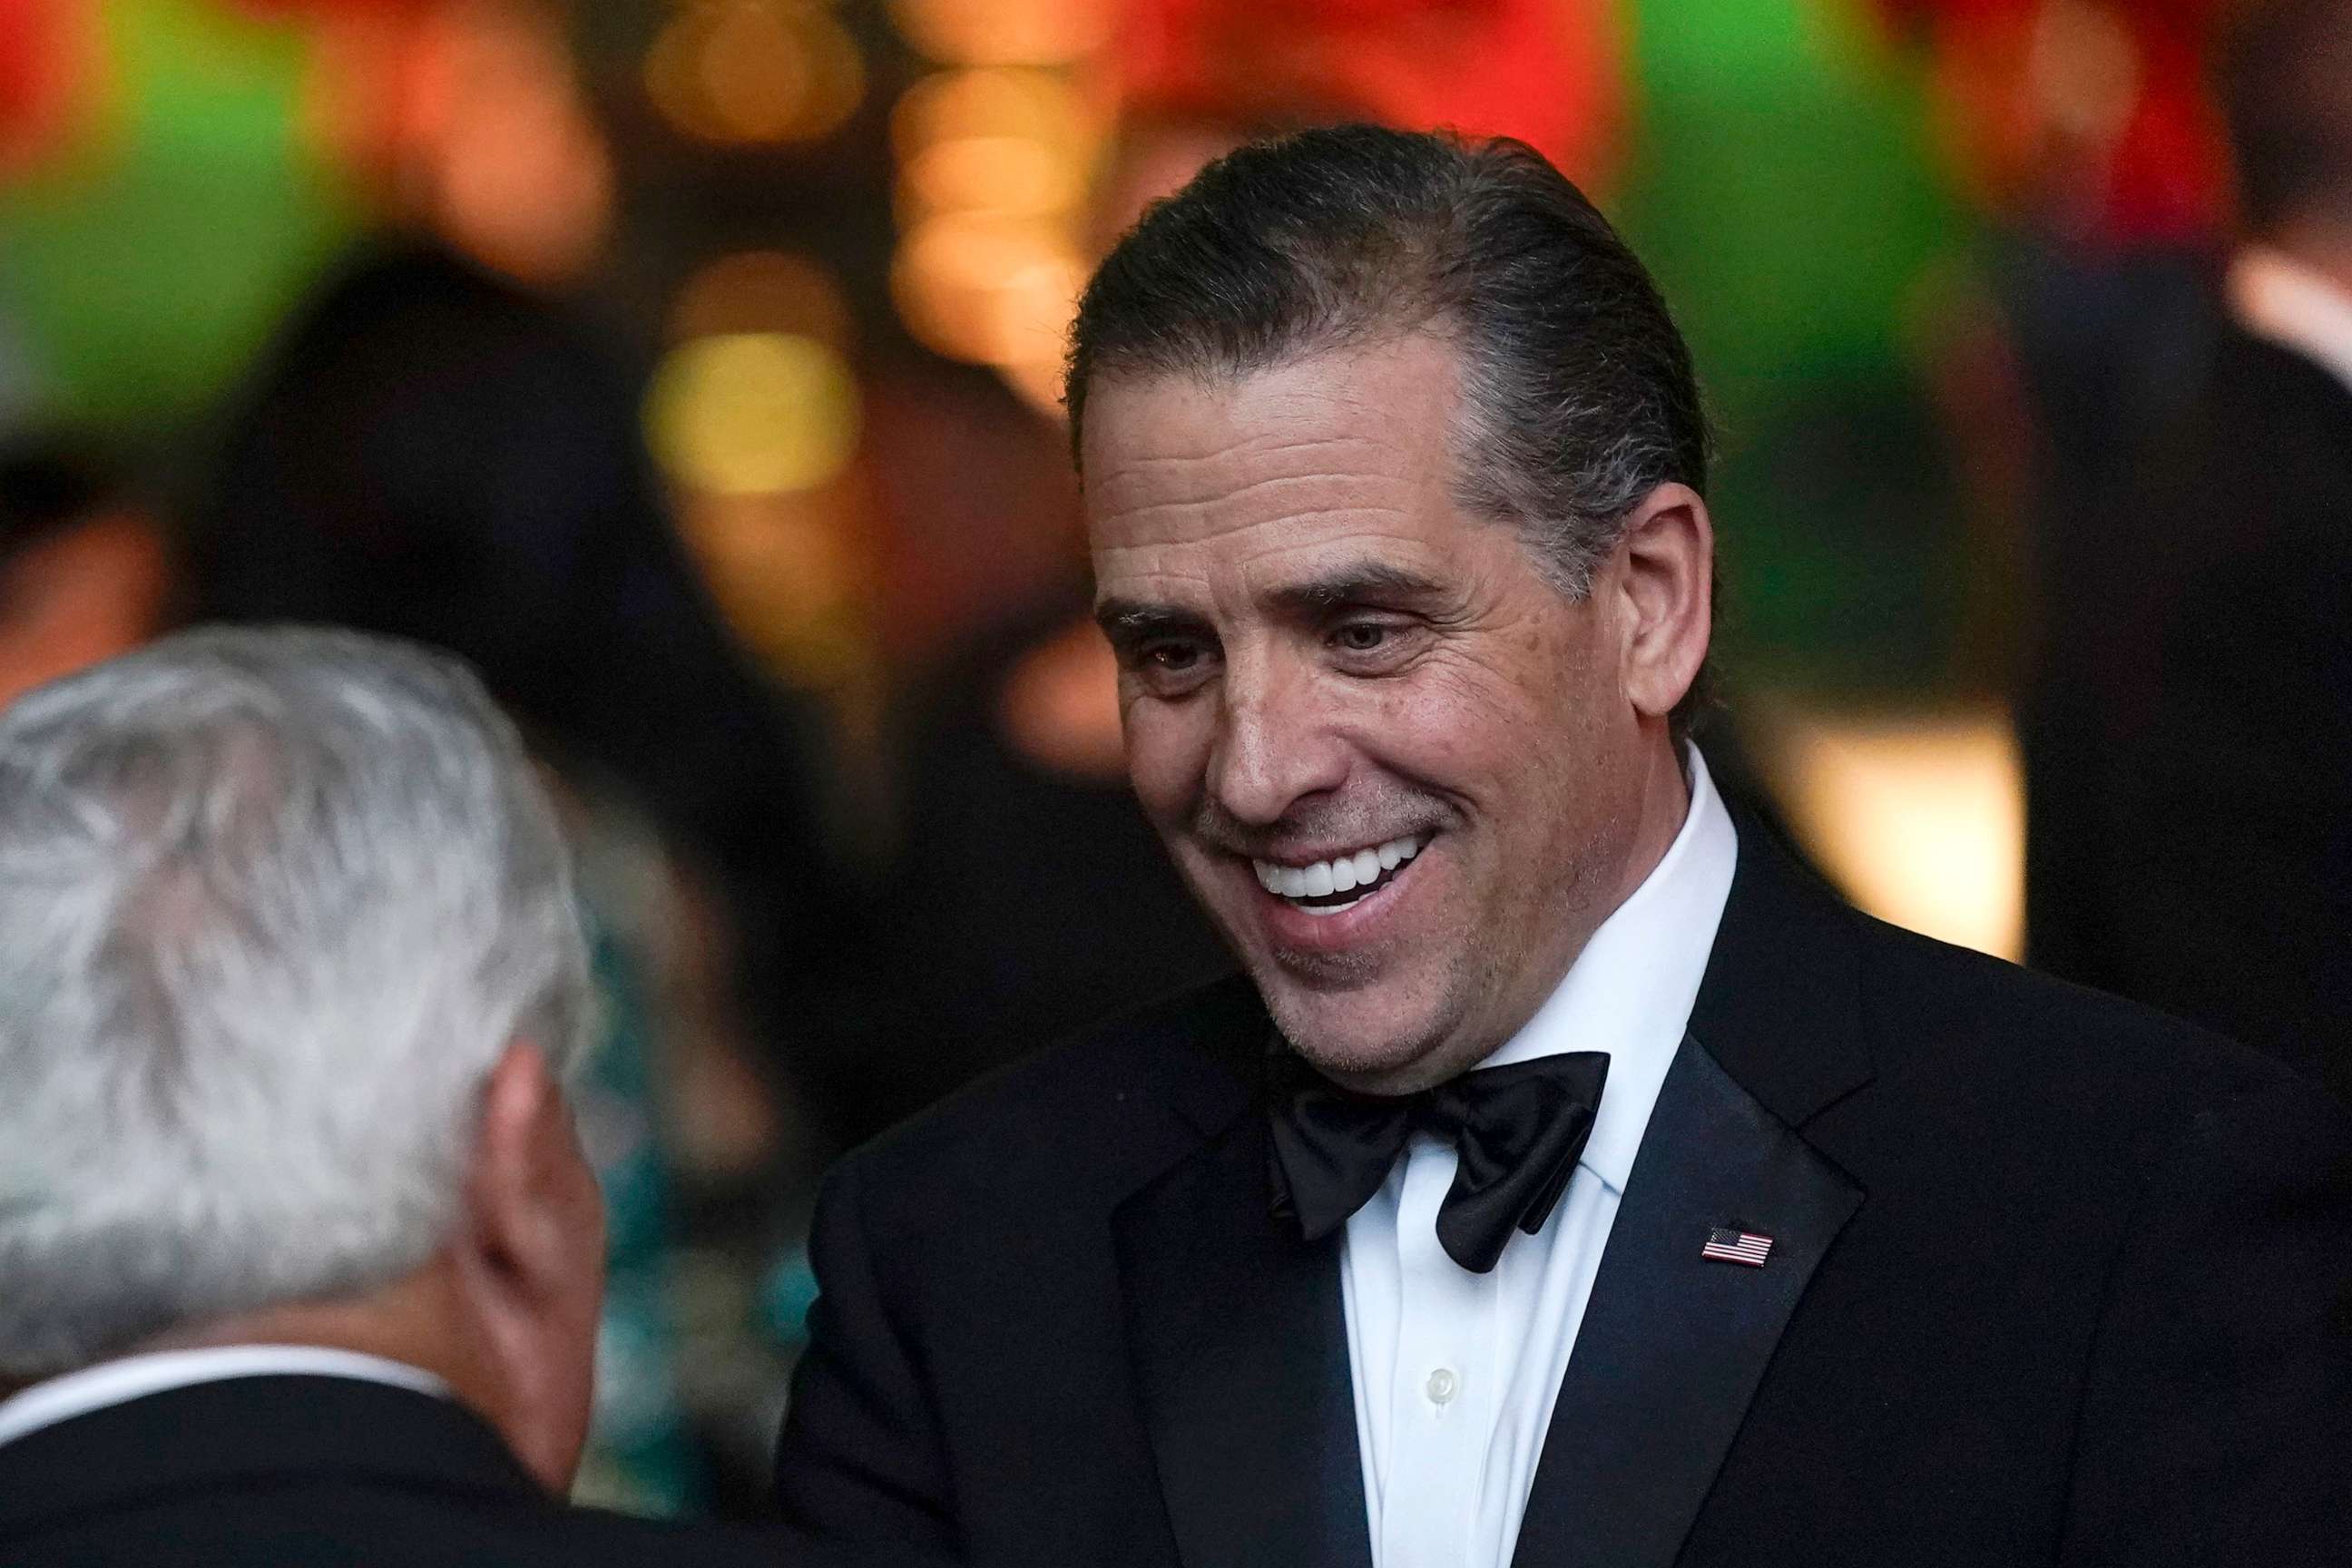 PHOTO: Hunter Biden talks with guests before President Joe Biden offers a toast during a State Dinner for India's Prime Minister Narendra Modi at the White House in Washington, June 22, 2023.